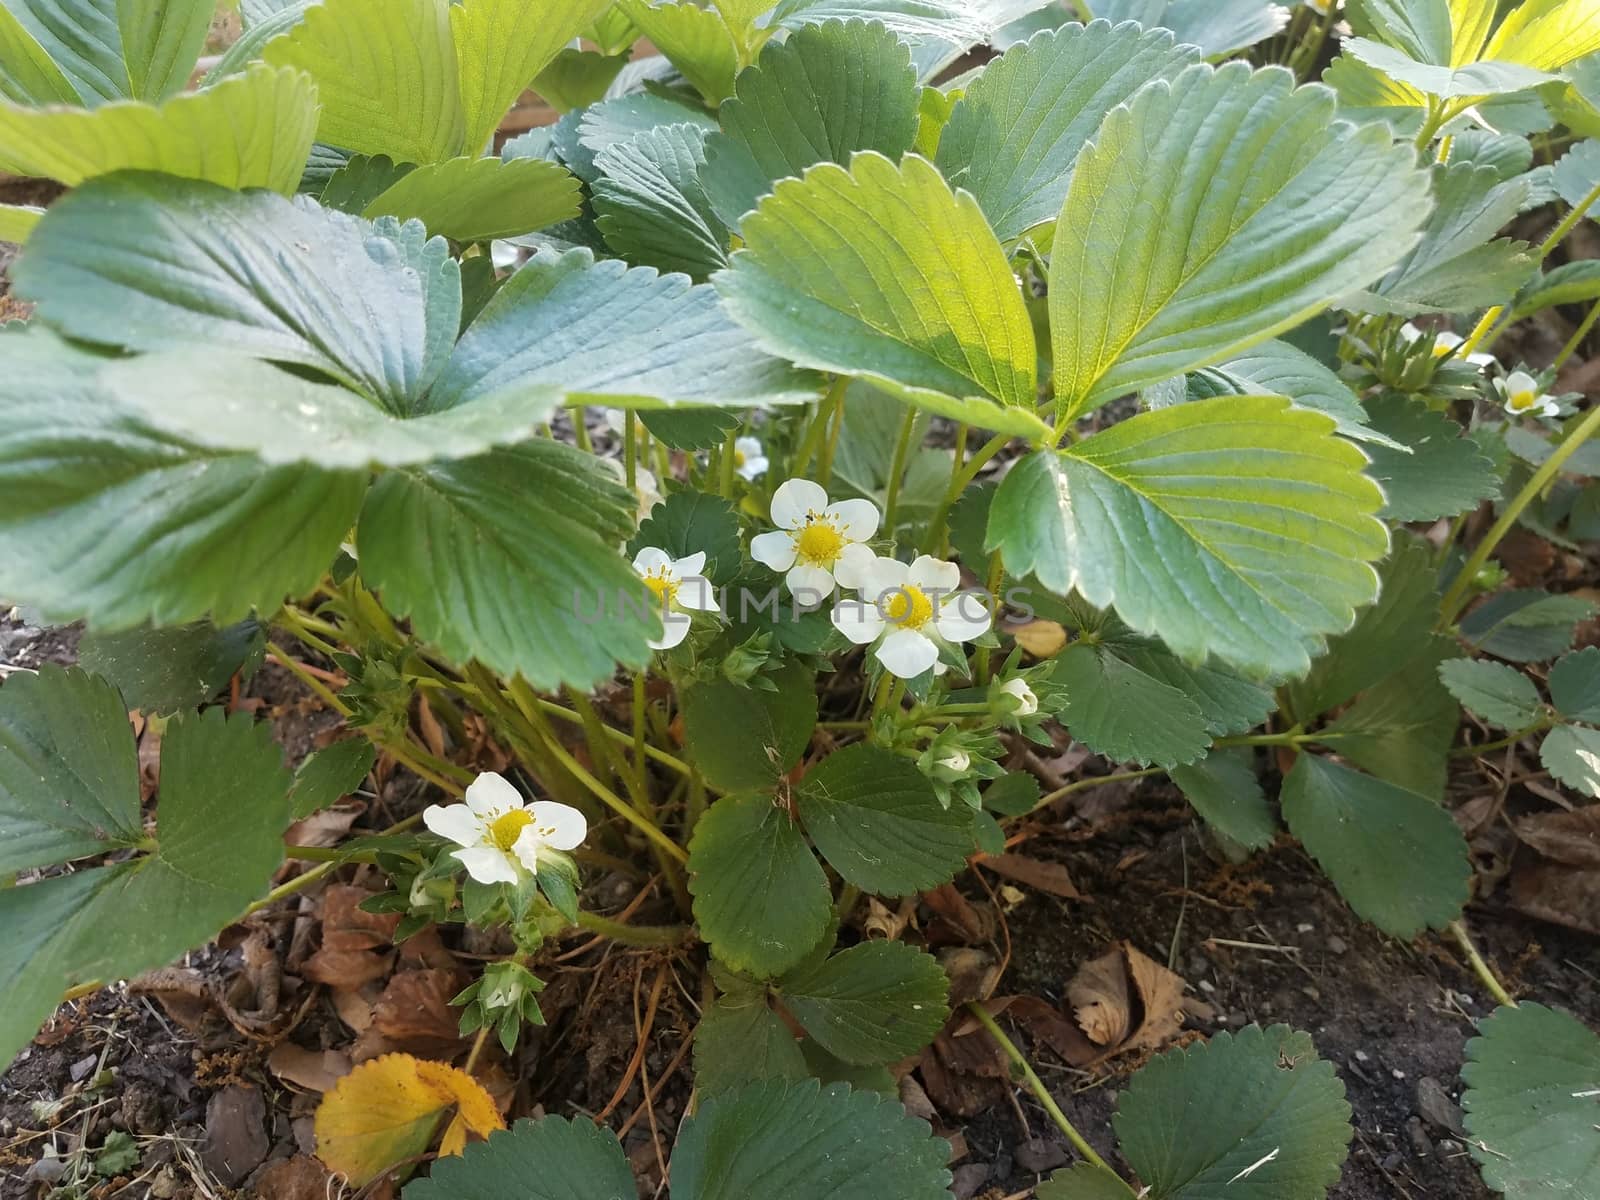 strawberry plant with white flowers and green leaves and dirt